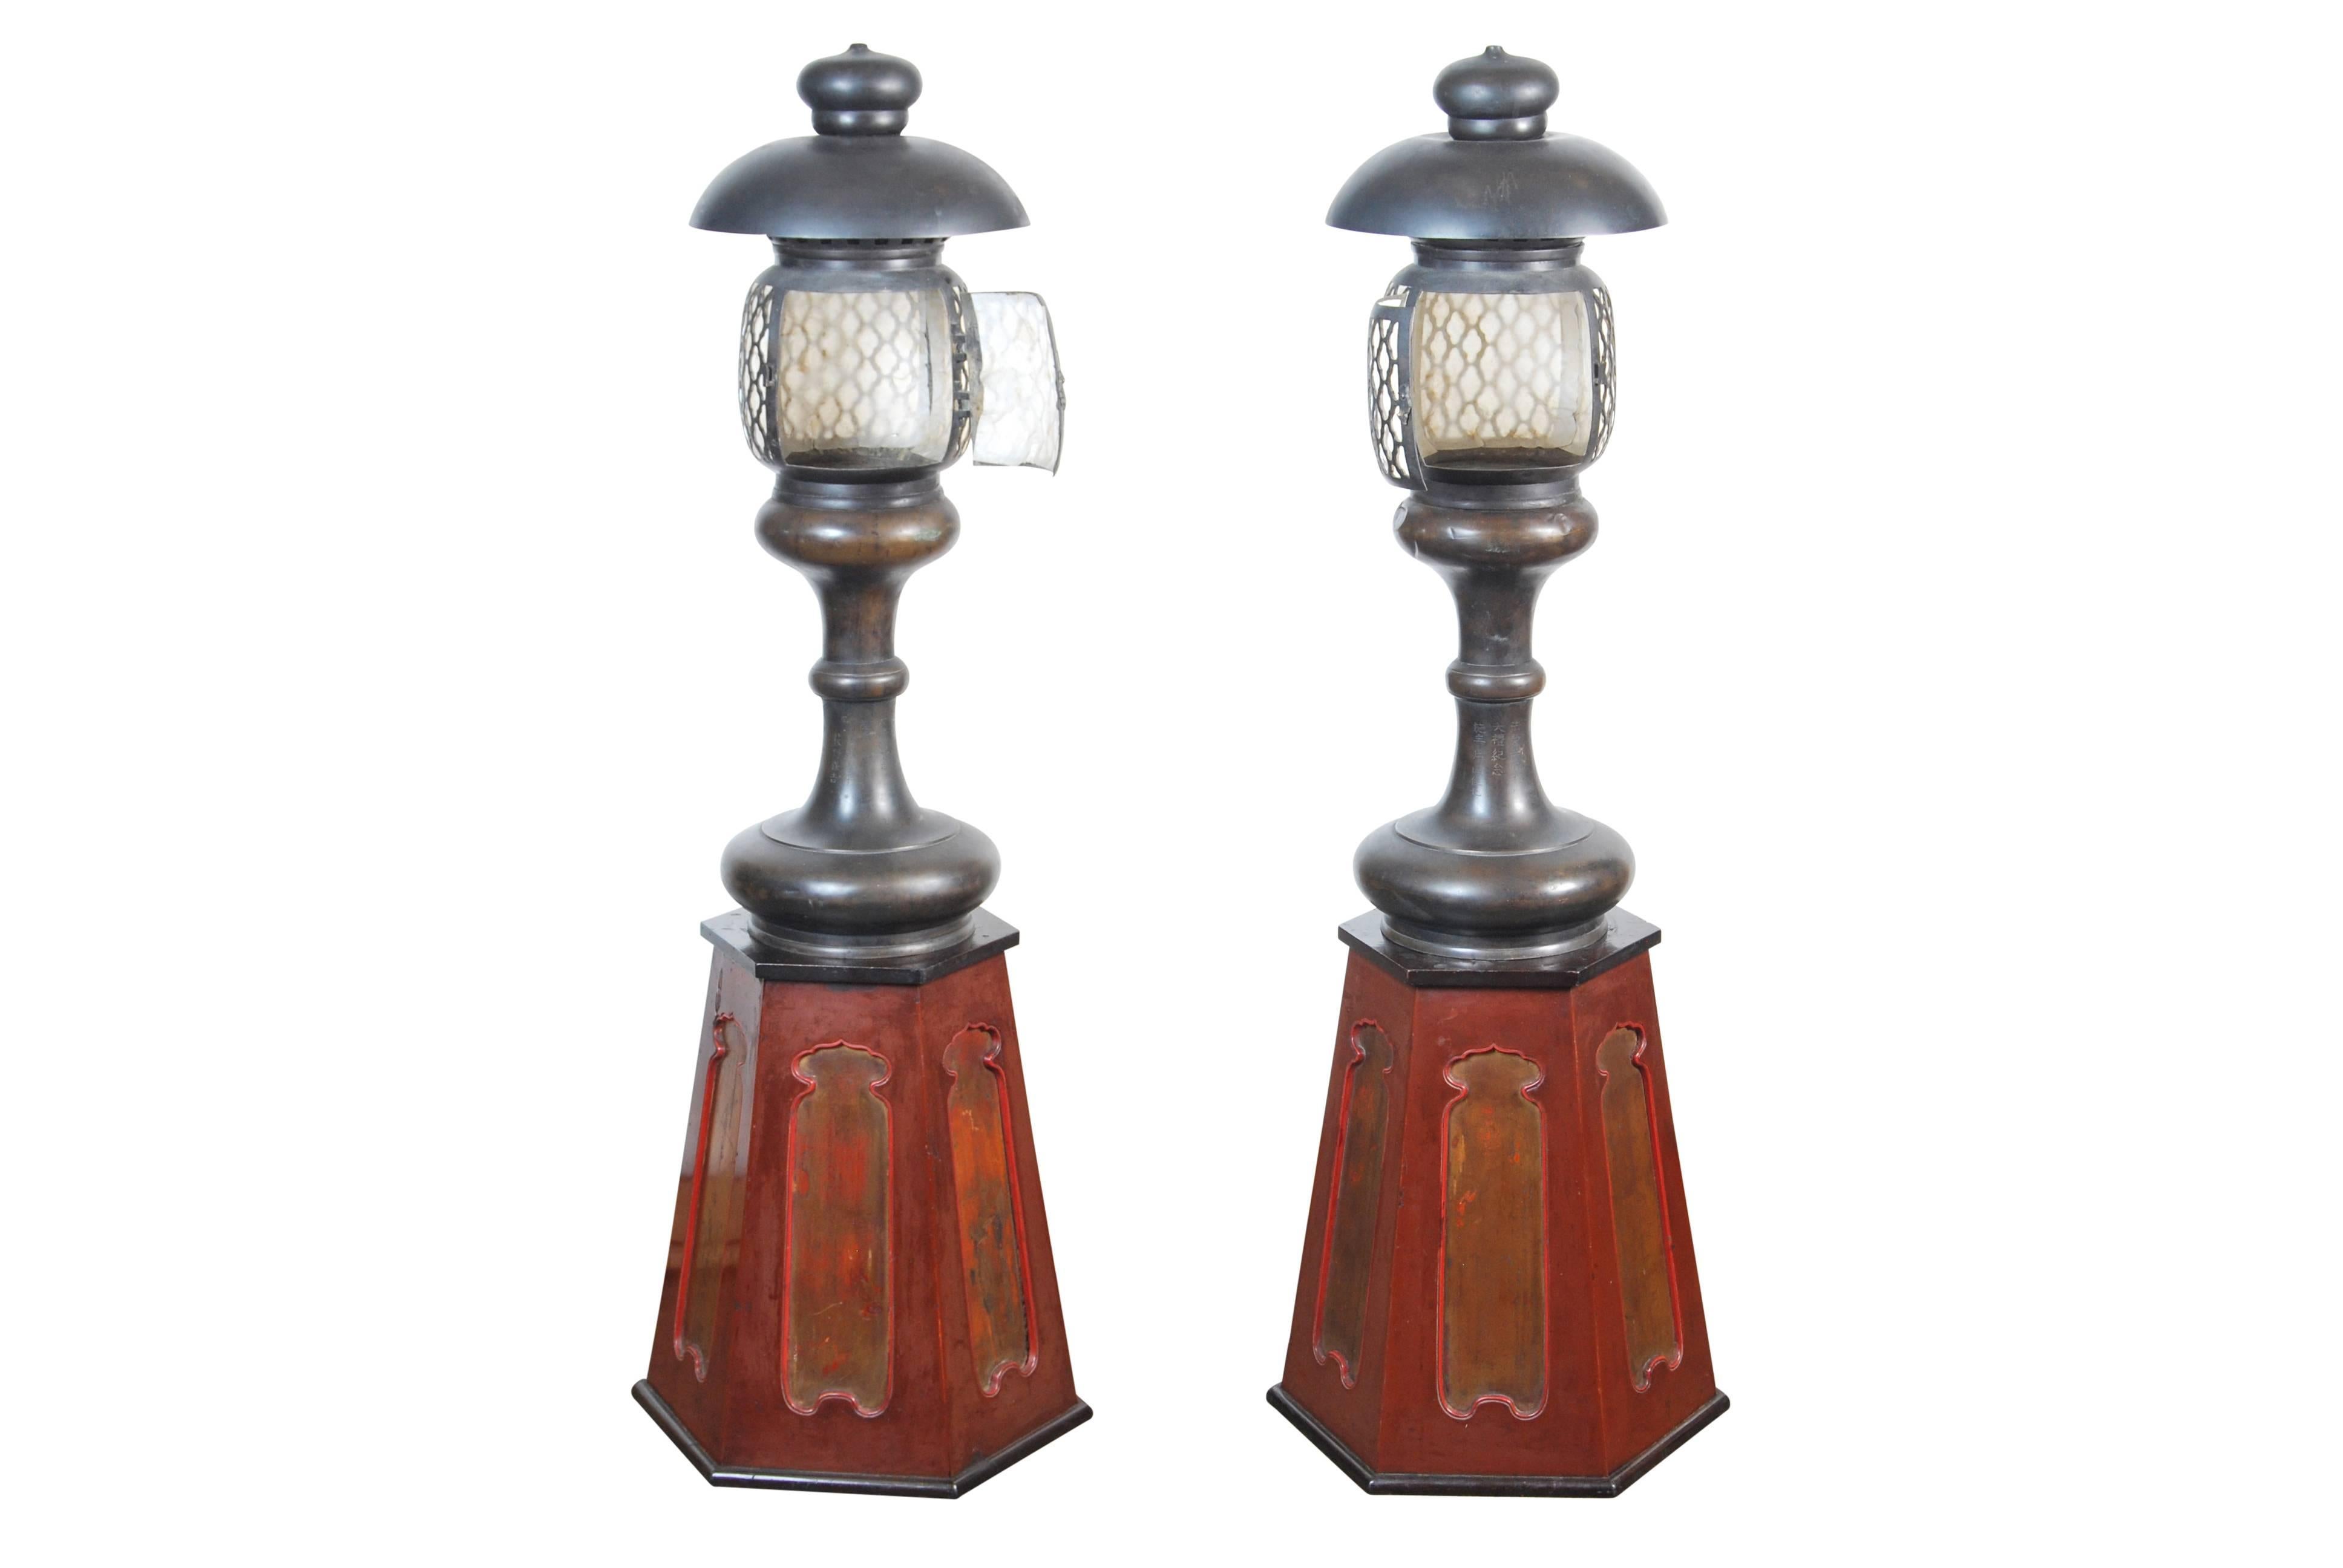 Rare pair of antique Japanese cast bronze Shinto Shrine lanterns paired with their original giltwood and lacquered flaring hexagonal pedestals, late Meiji to early Taisho period, early 20th century. Dimensions: Lanterns: H 90cm x D 33cm. Stands: H